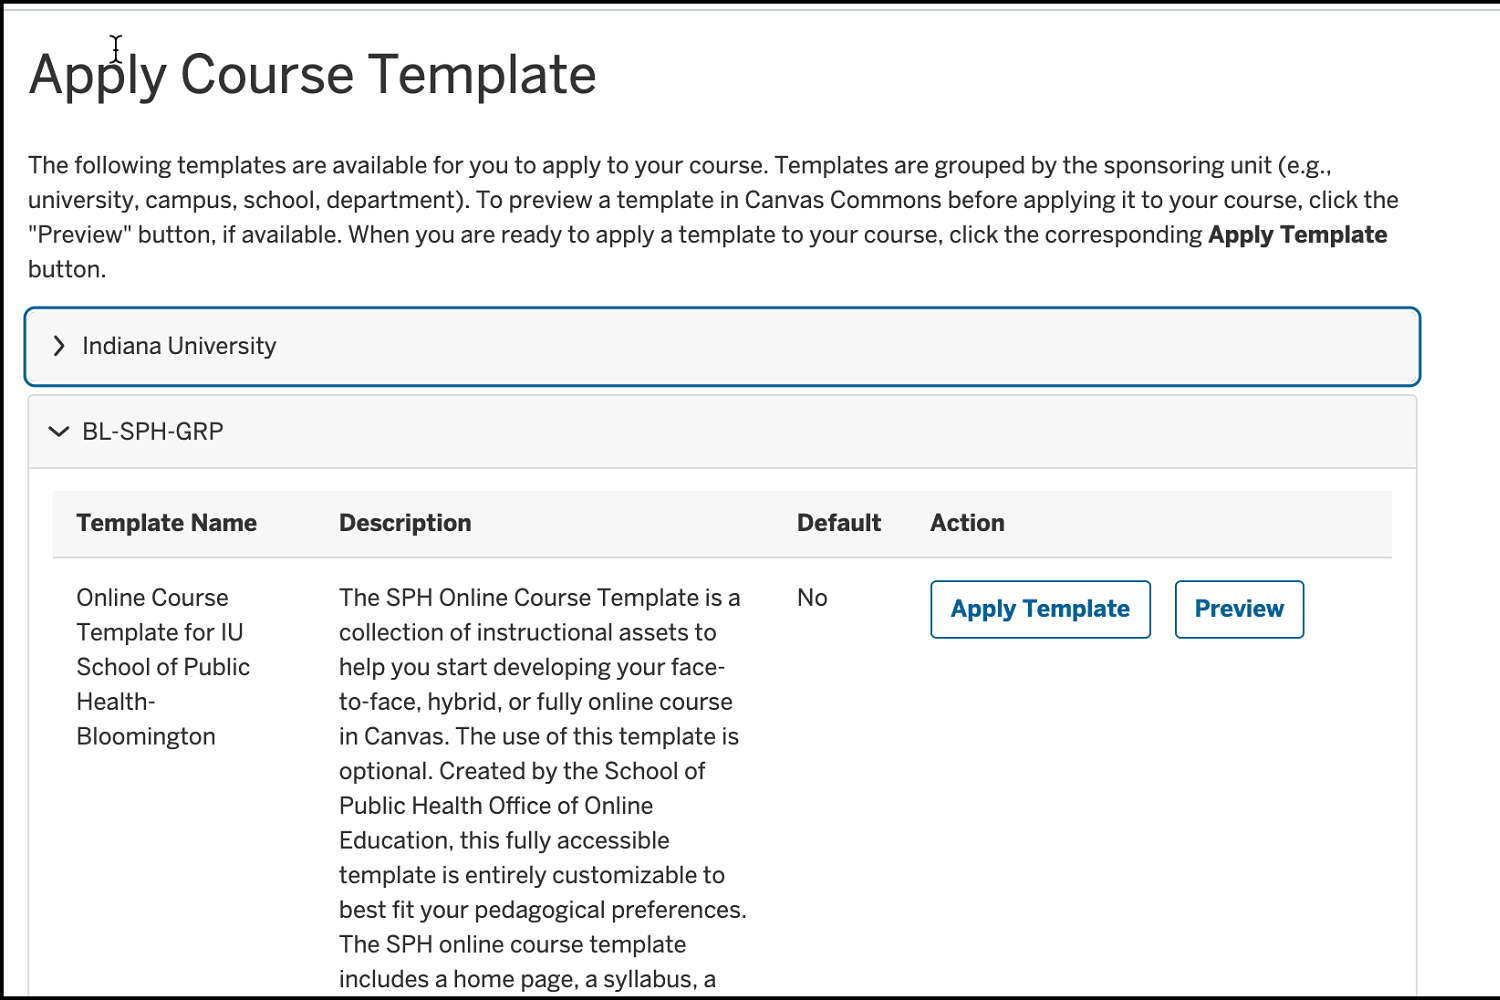 Image of a course template ready to be applied in Canvas